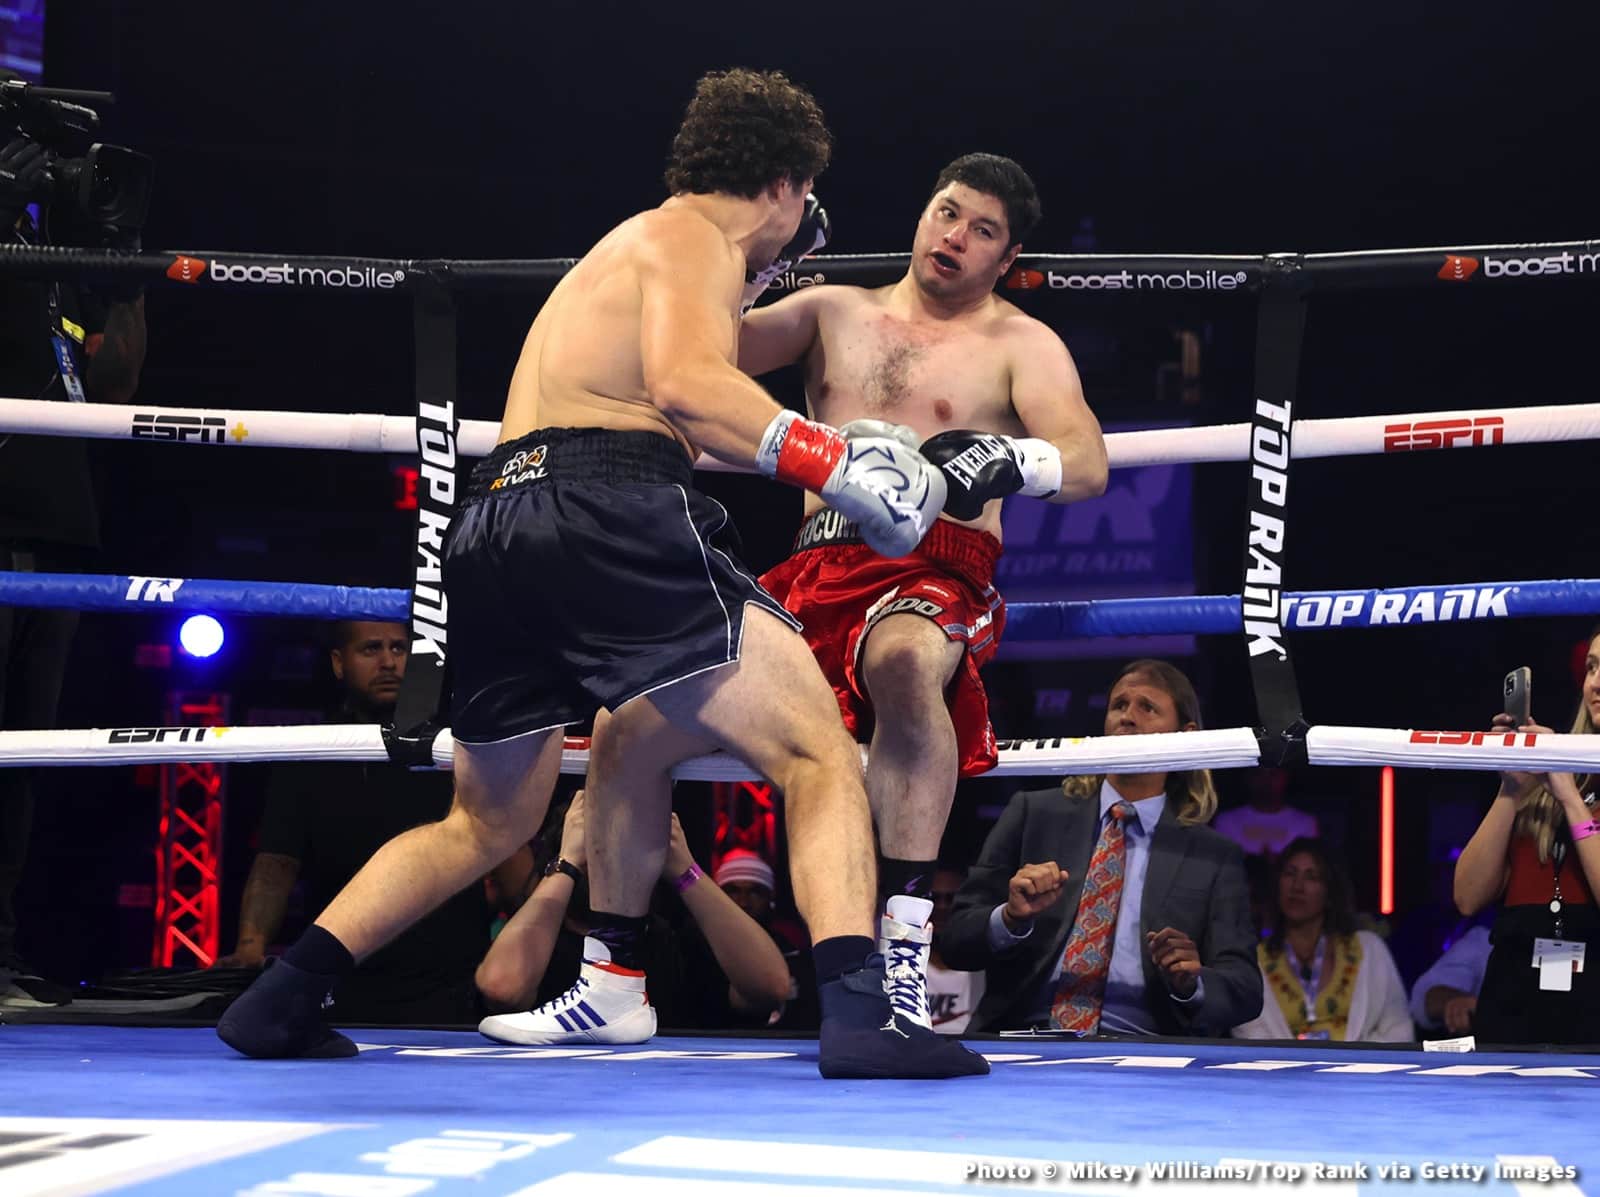 Image: Results / Photos: Jared Anderson, Richard Torrez Jr., Efe Ajagba With KO Wins